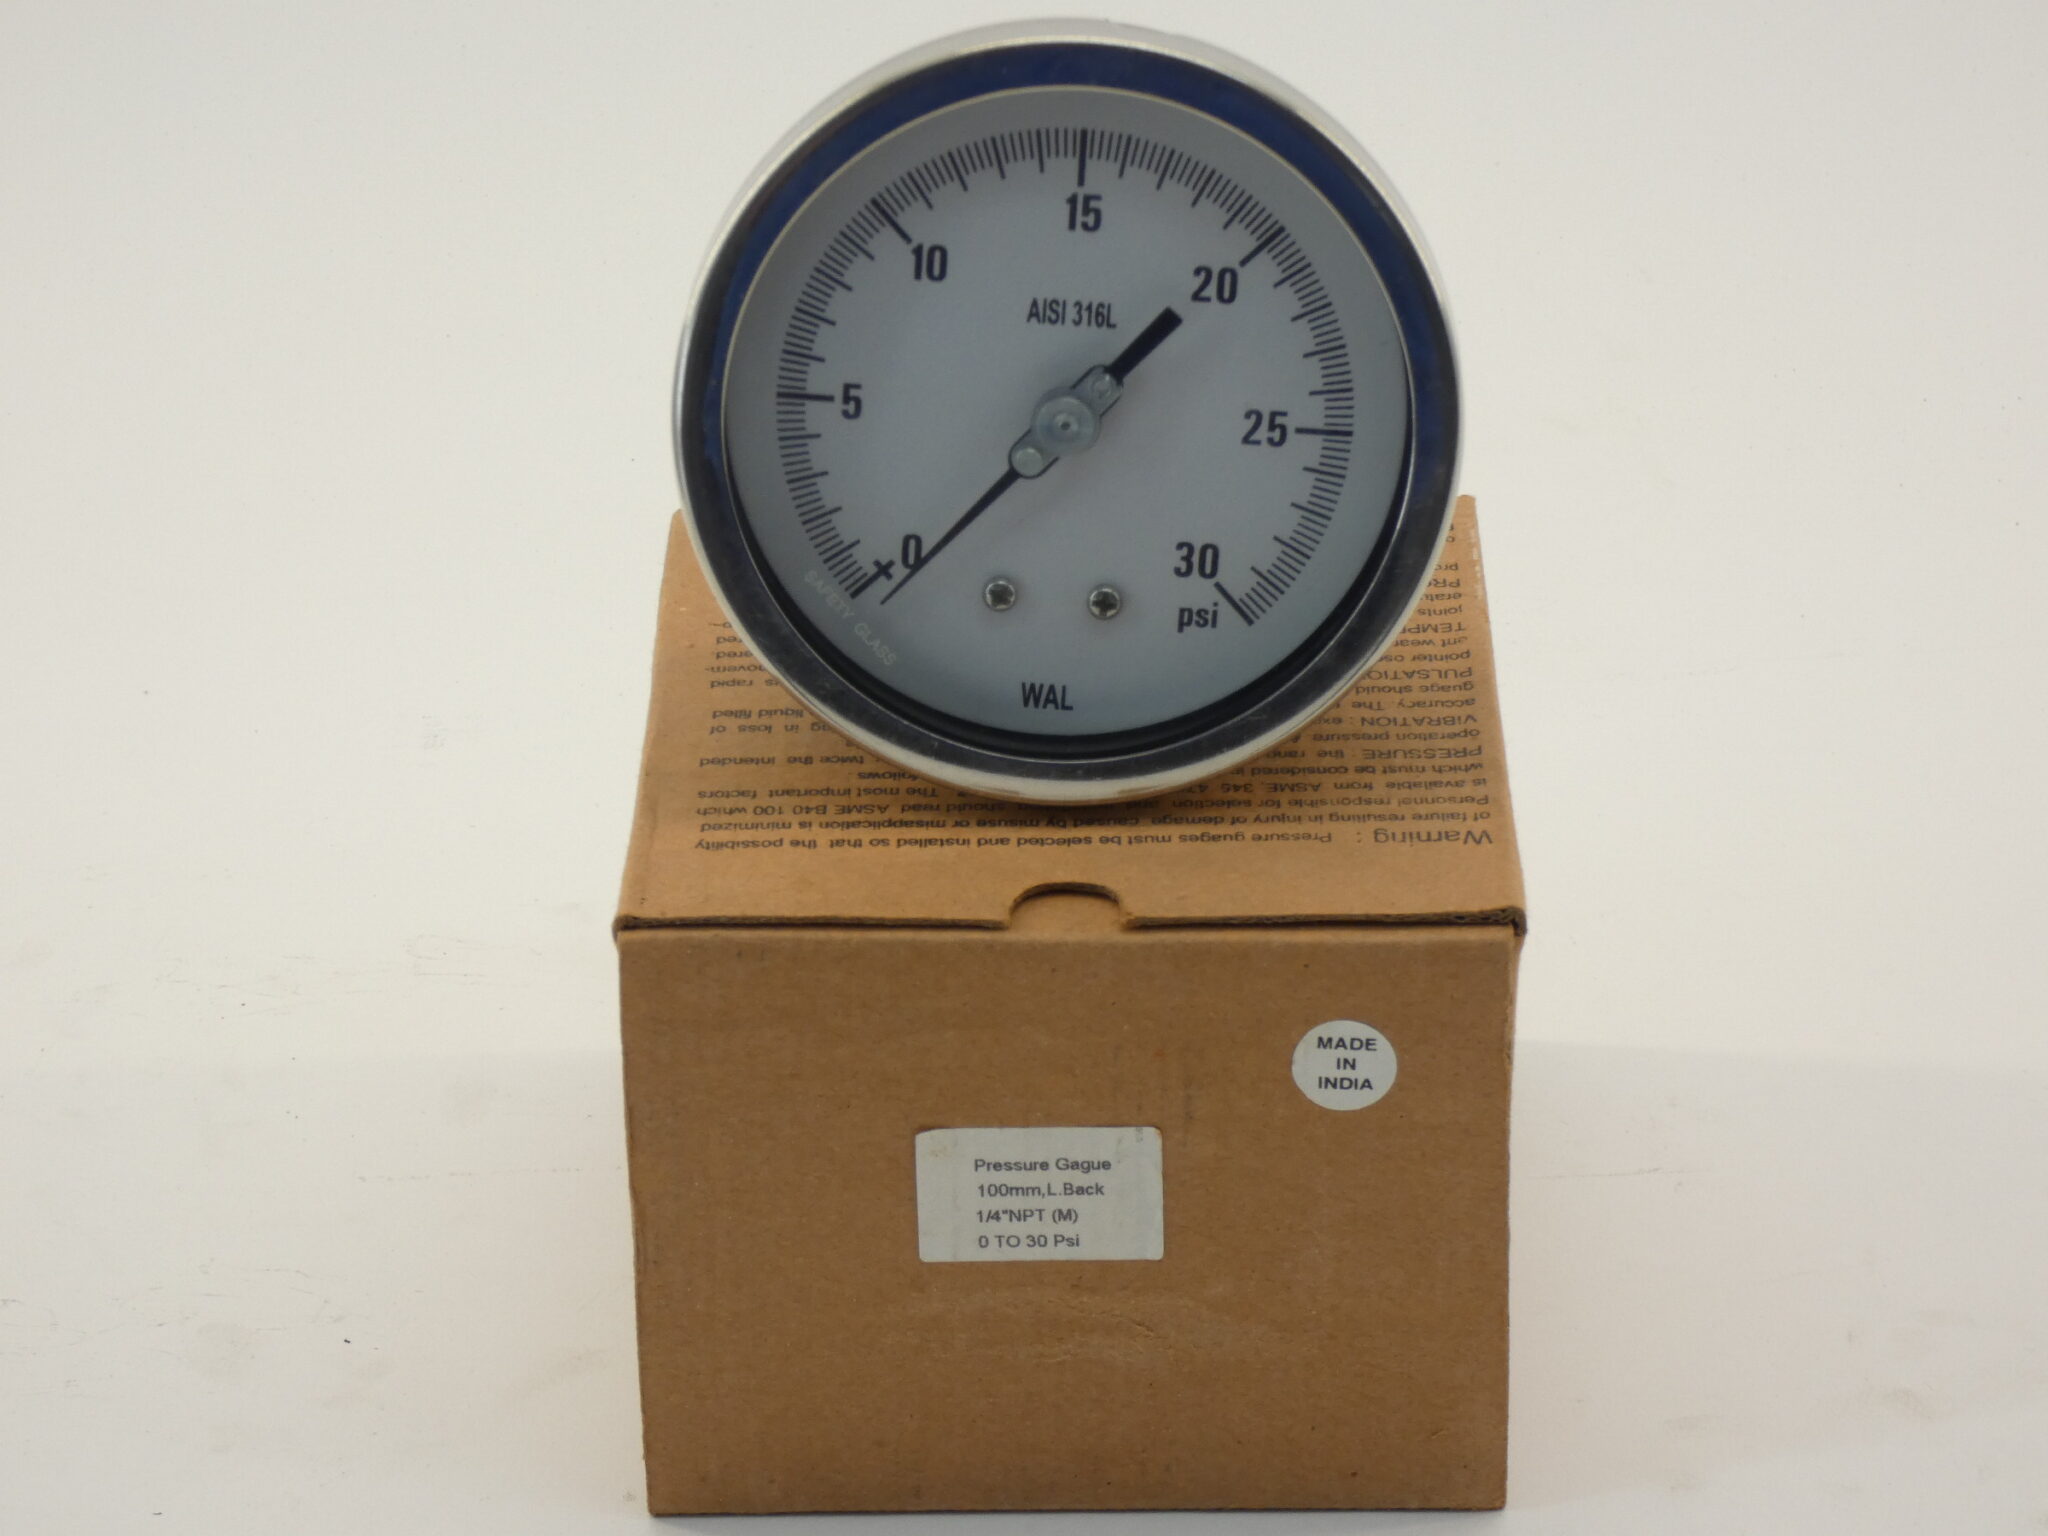 WAL Pressure Gauge 4" Face Dial 0-30 PSI 1/4"NPT Back Connection Stainless St...